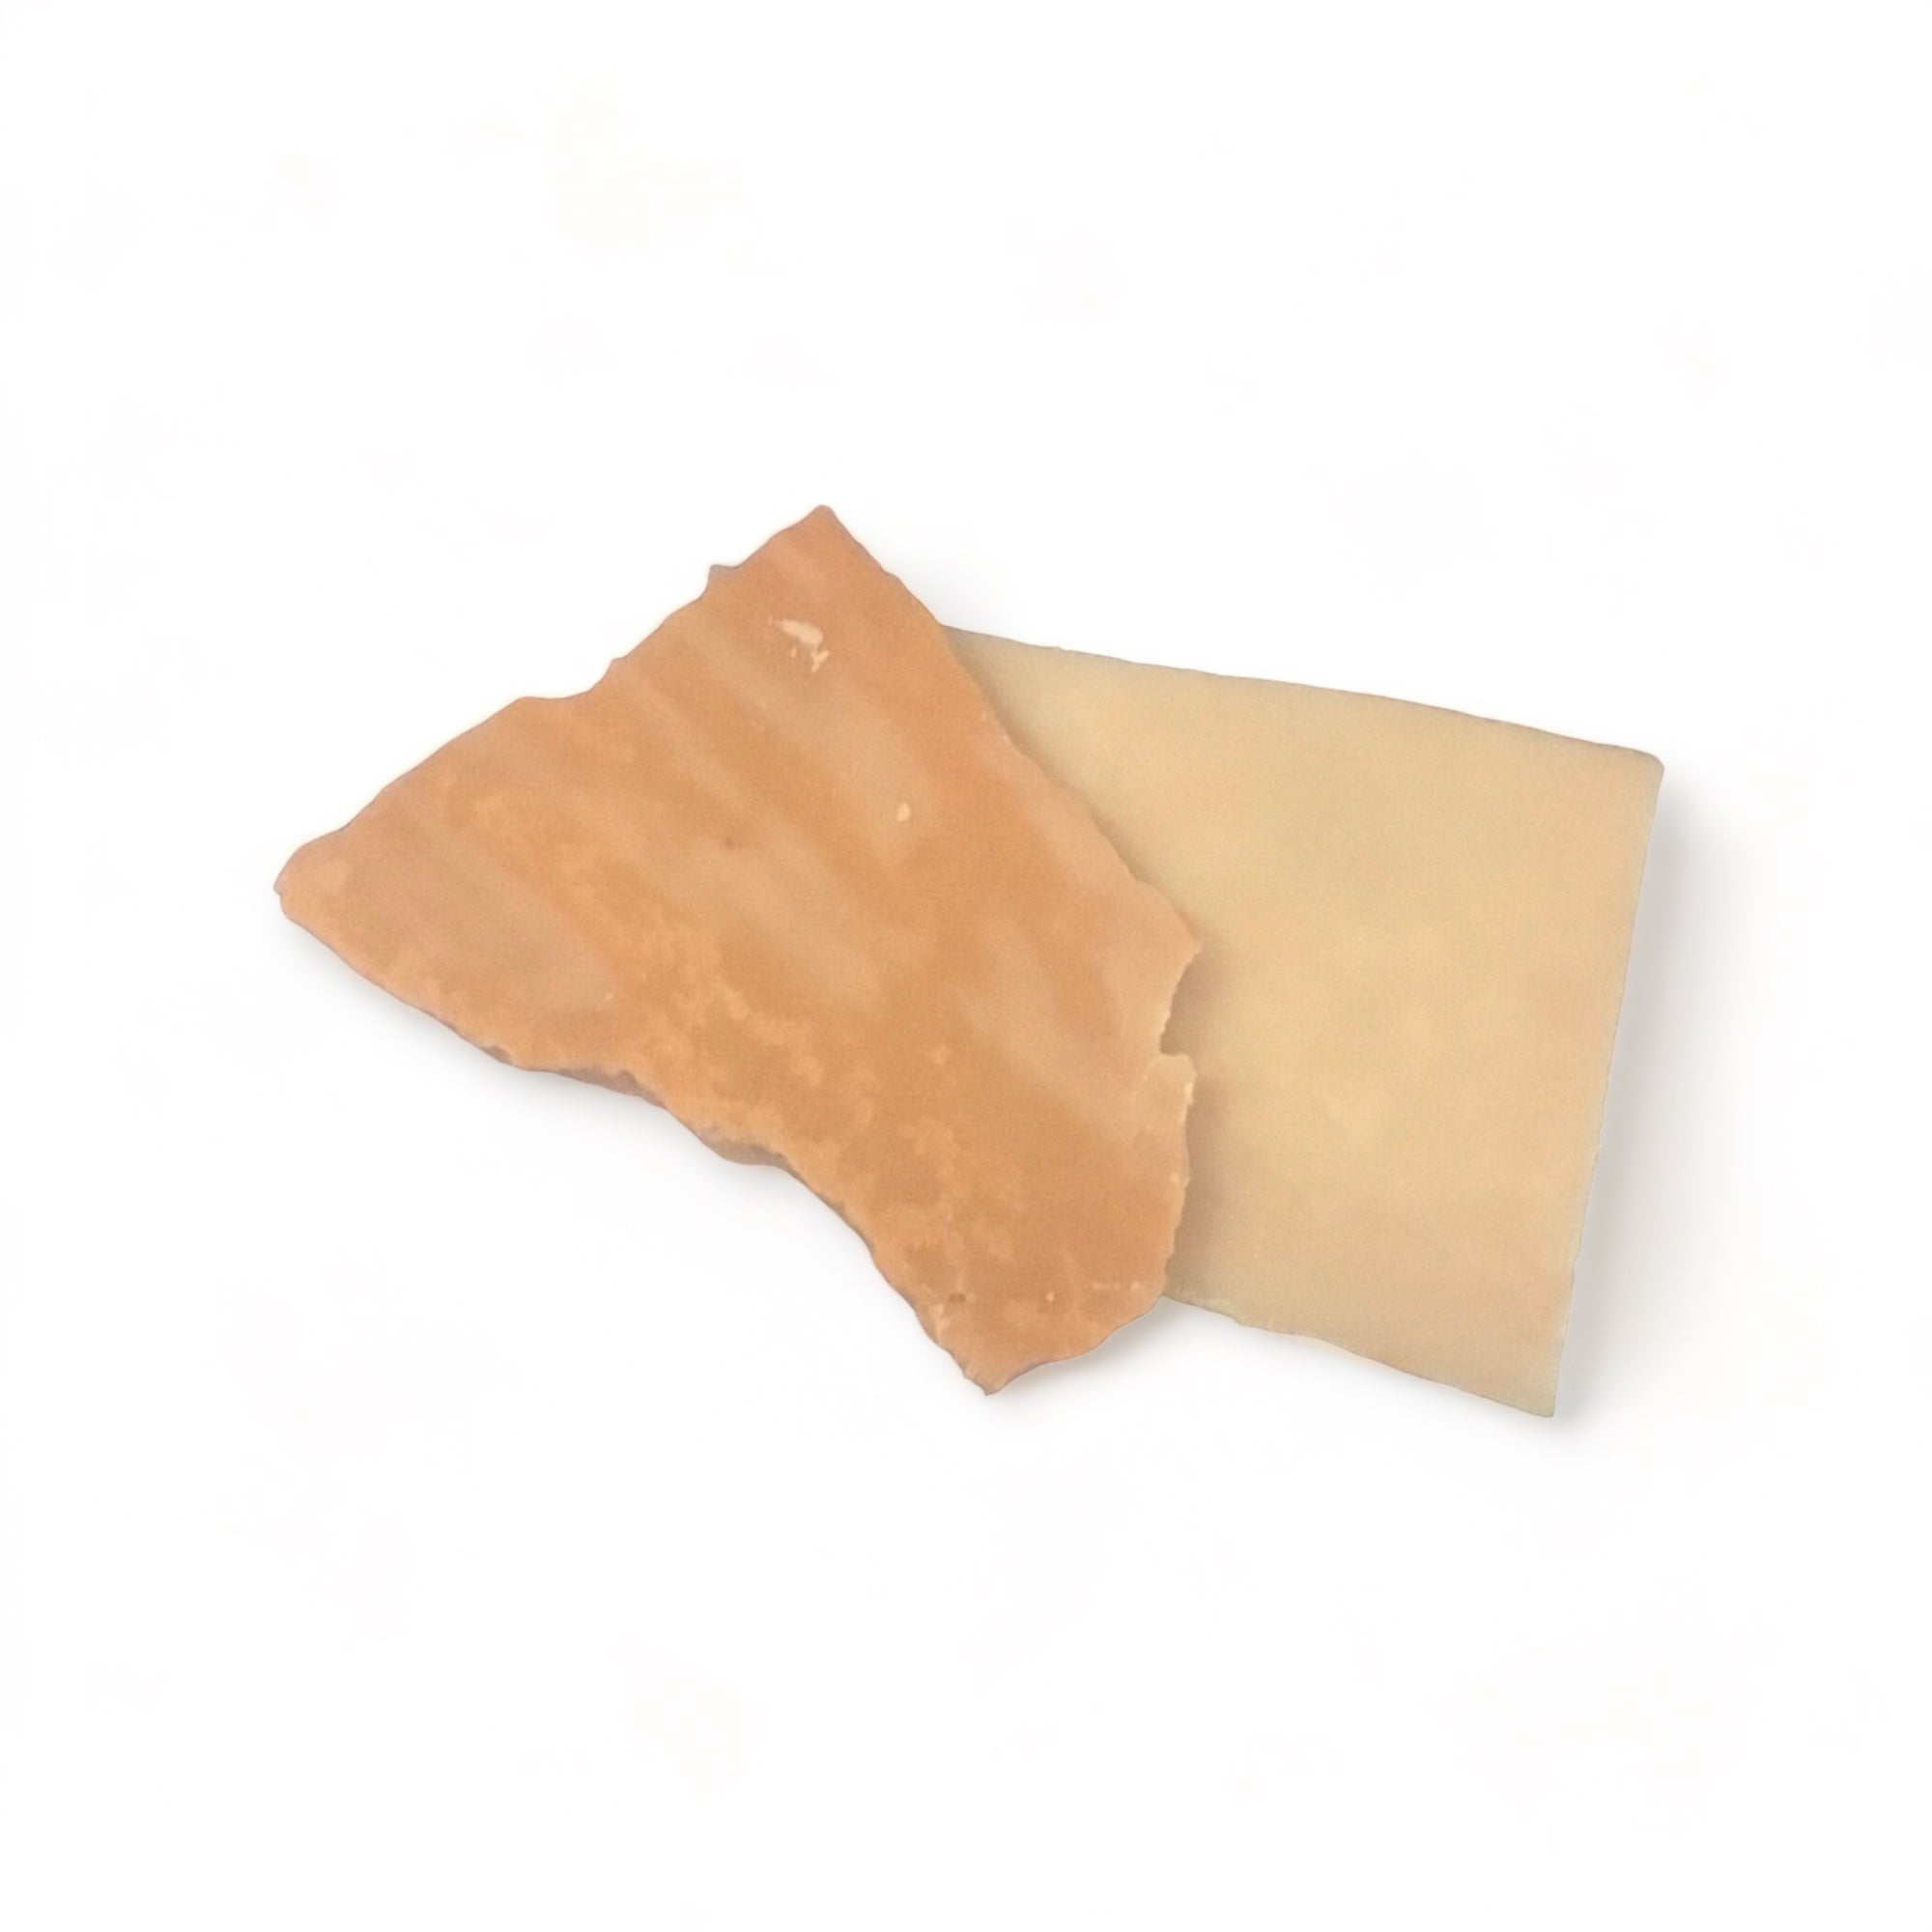 Two ounces of pale burnt orange colored wax melts in bark form on a white background